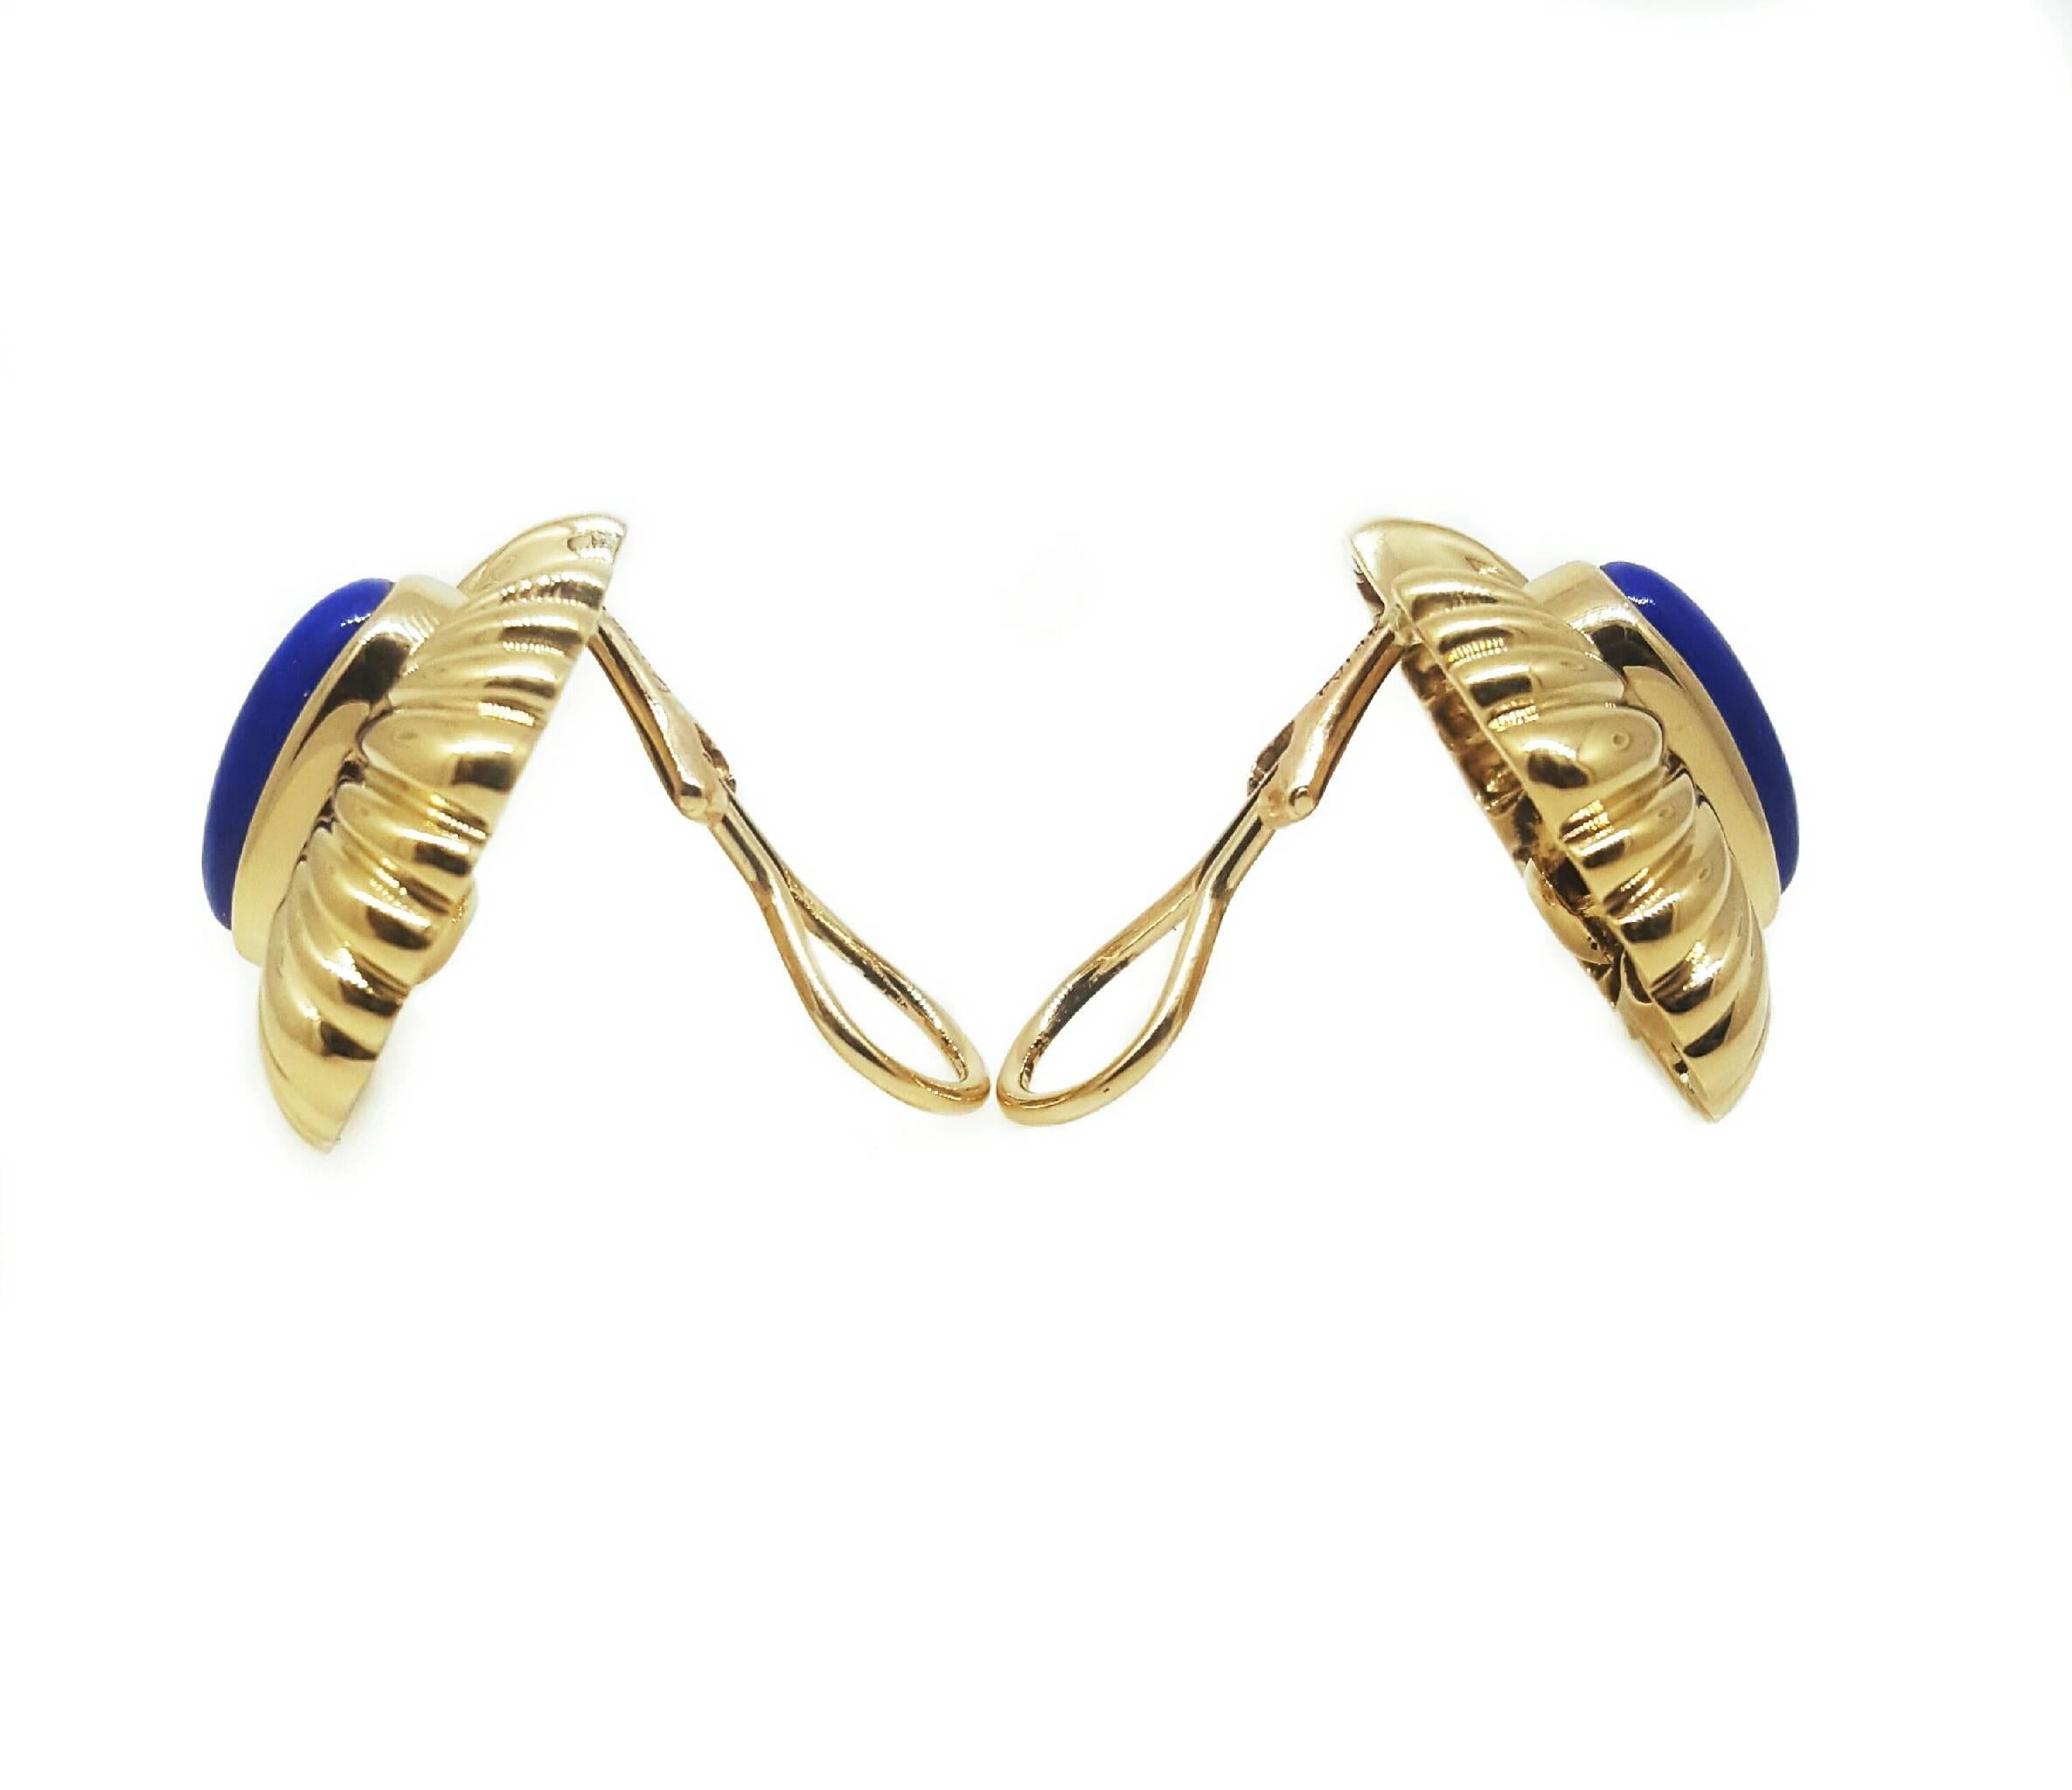 A nice pair of clip on style earrings. The earrings measure 0.8 inches long and 1 inch wide. The earrings feature two beautiful carved Lapis Lazuli stones. 